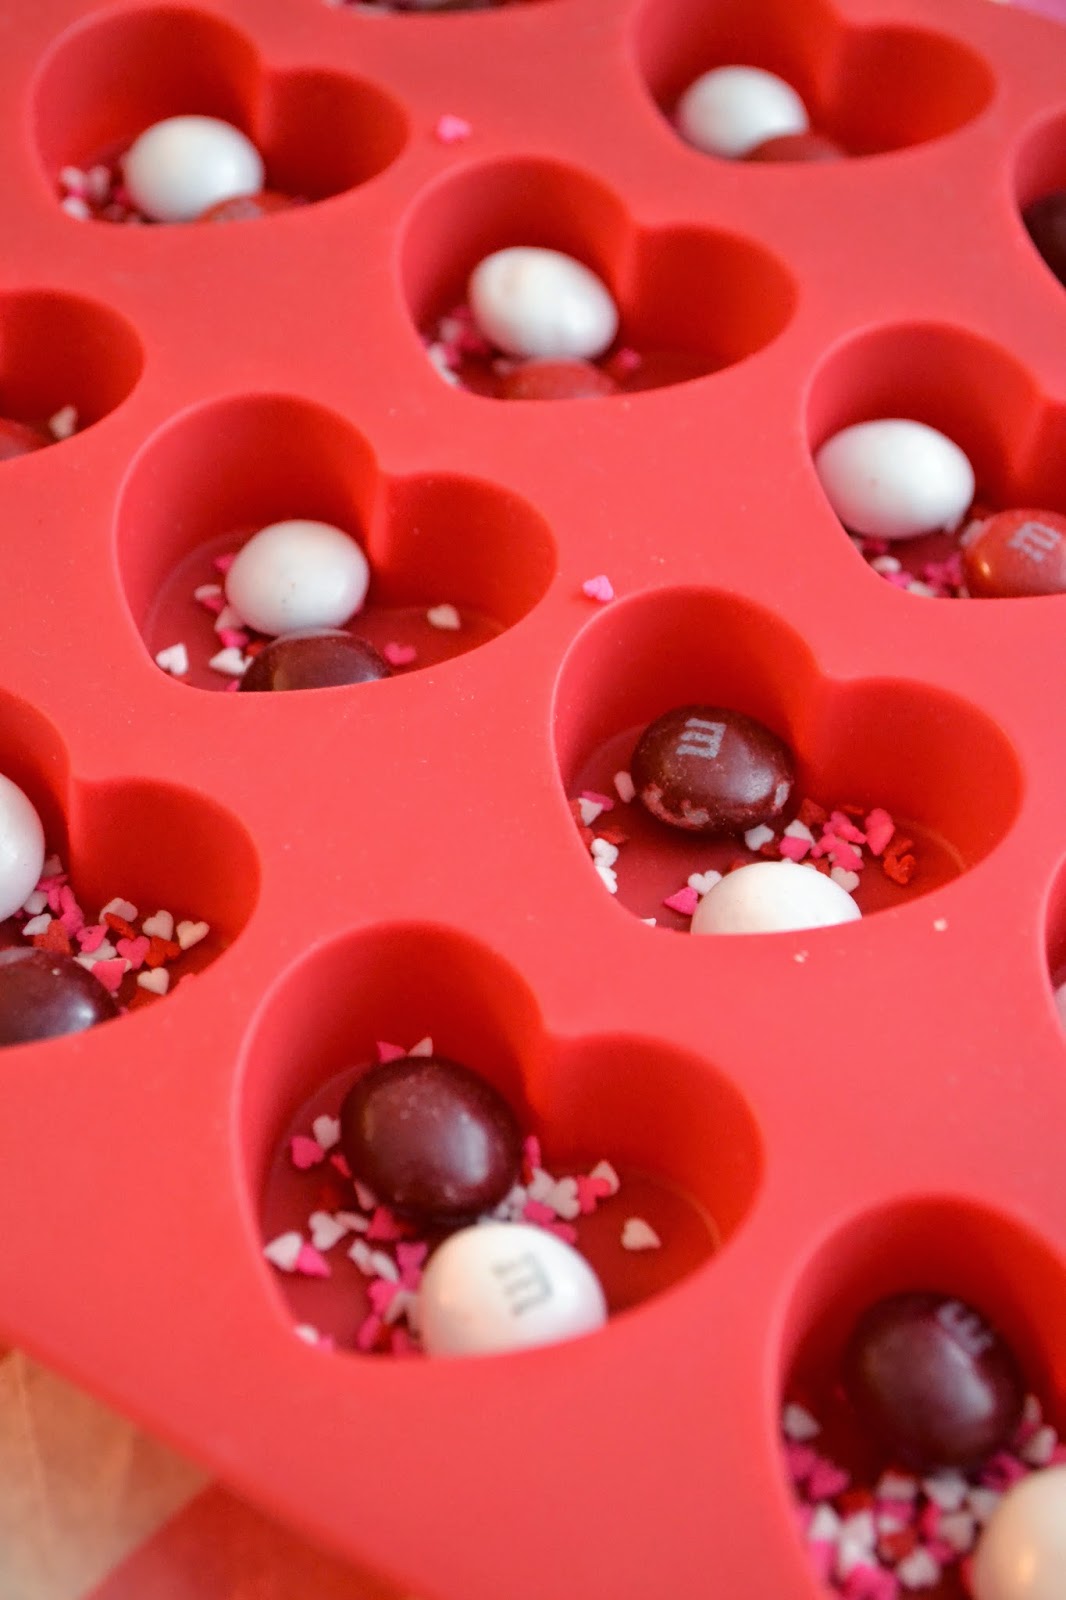 Red Velvet White Chocolate Candies - Building Our Story